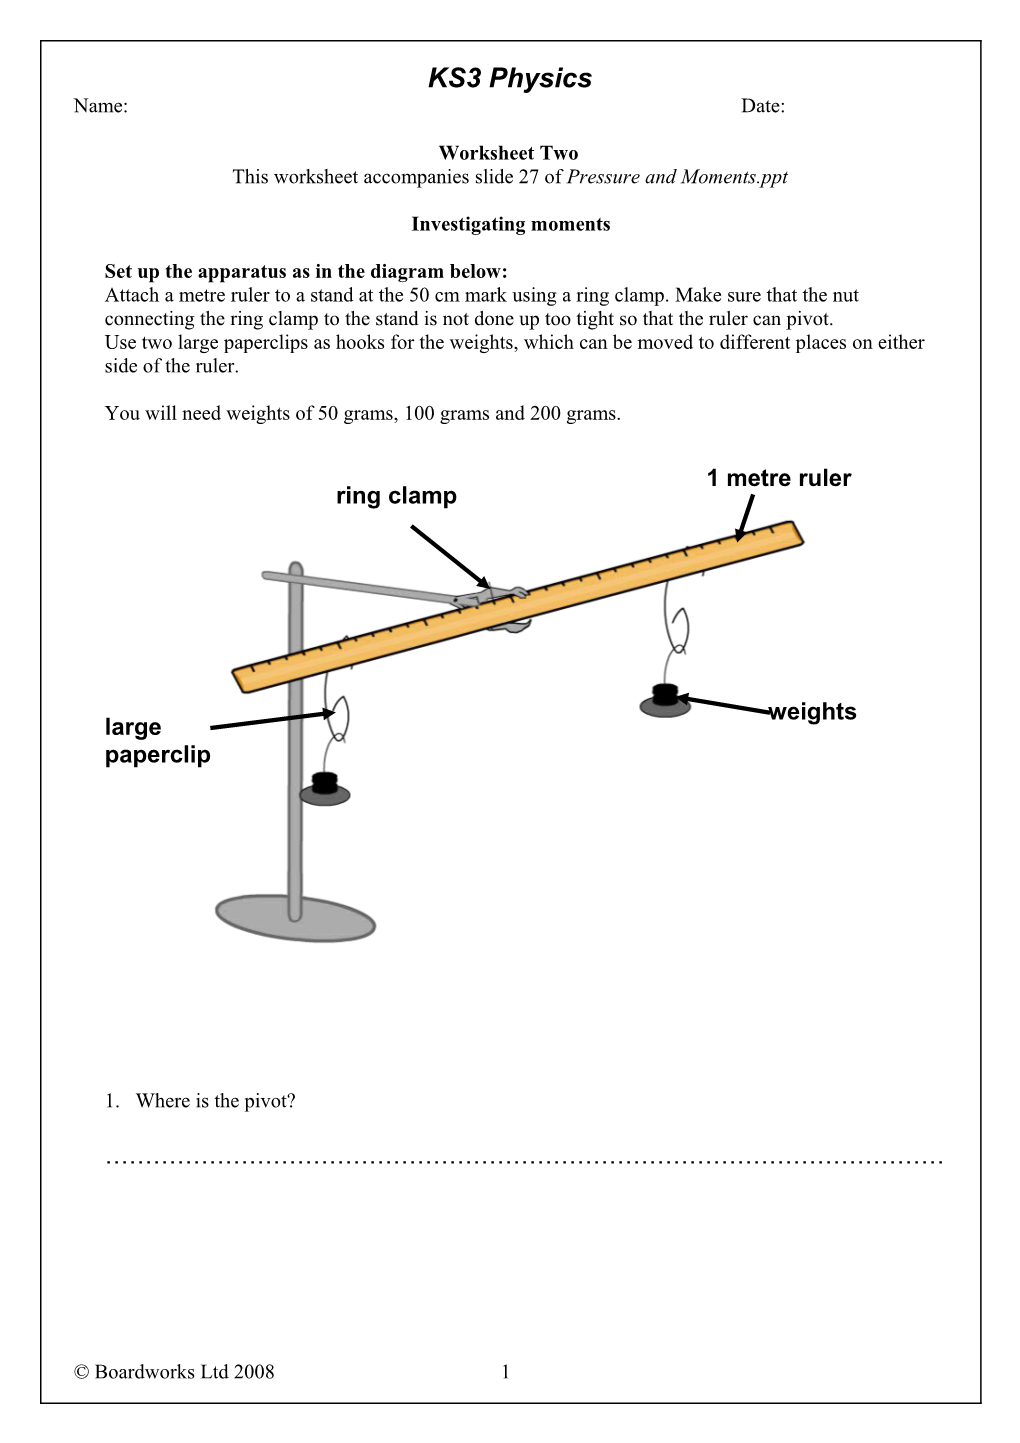 Pressure and Moments Worksheet 2